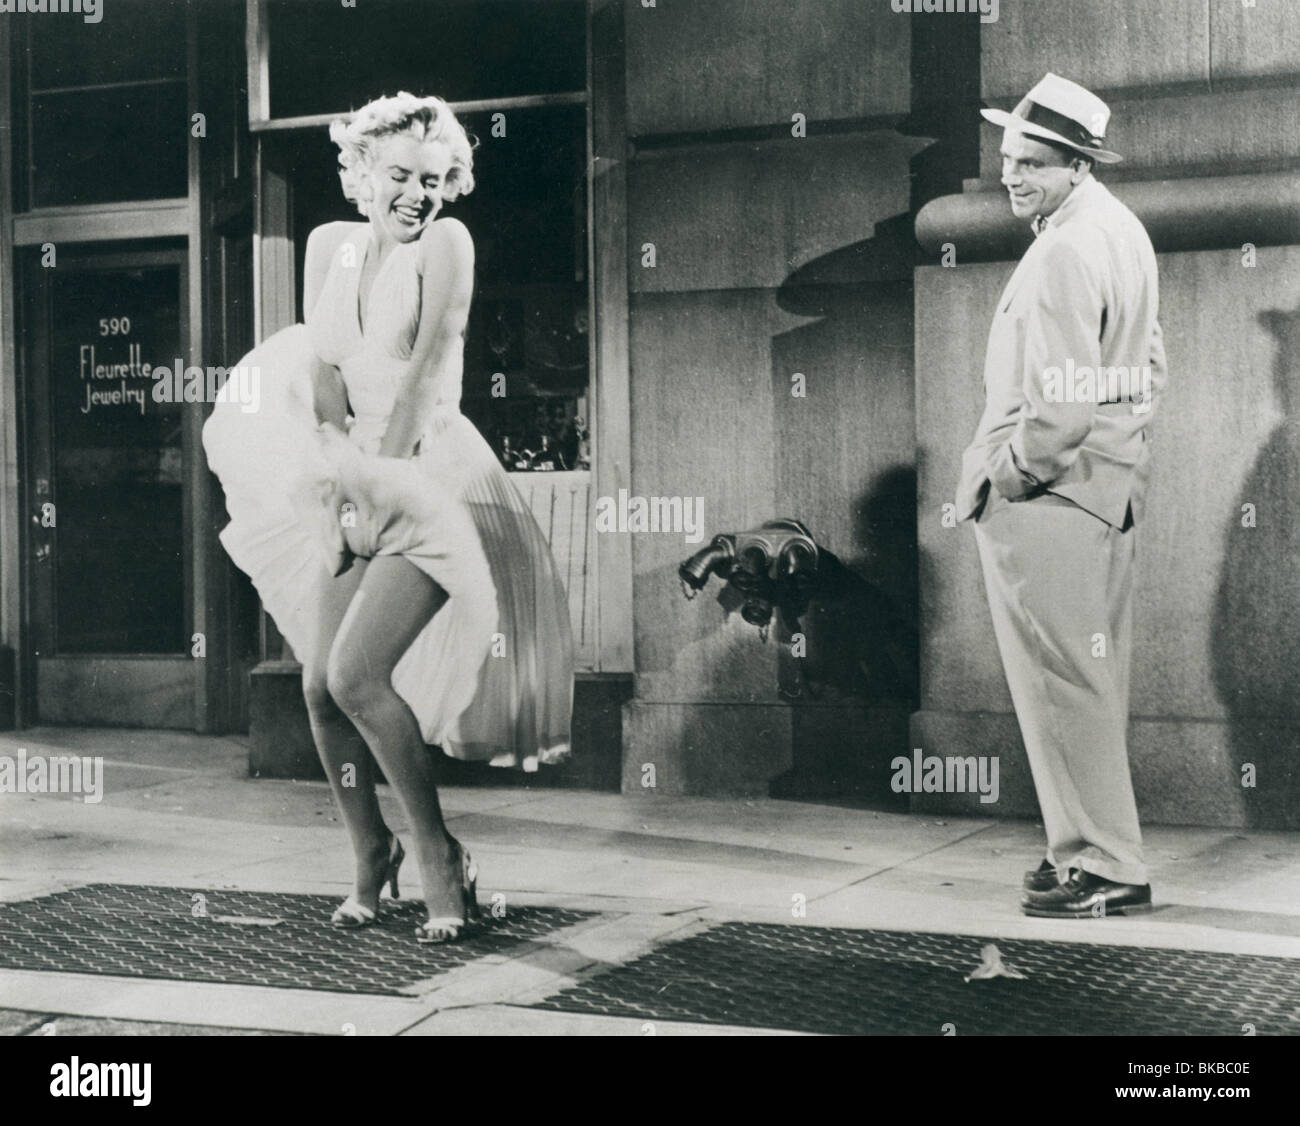 SEVEN YEAR ITCH (1955) MARILYN MONROE, TOM EWELL SYIT 001 P Stockfoto